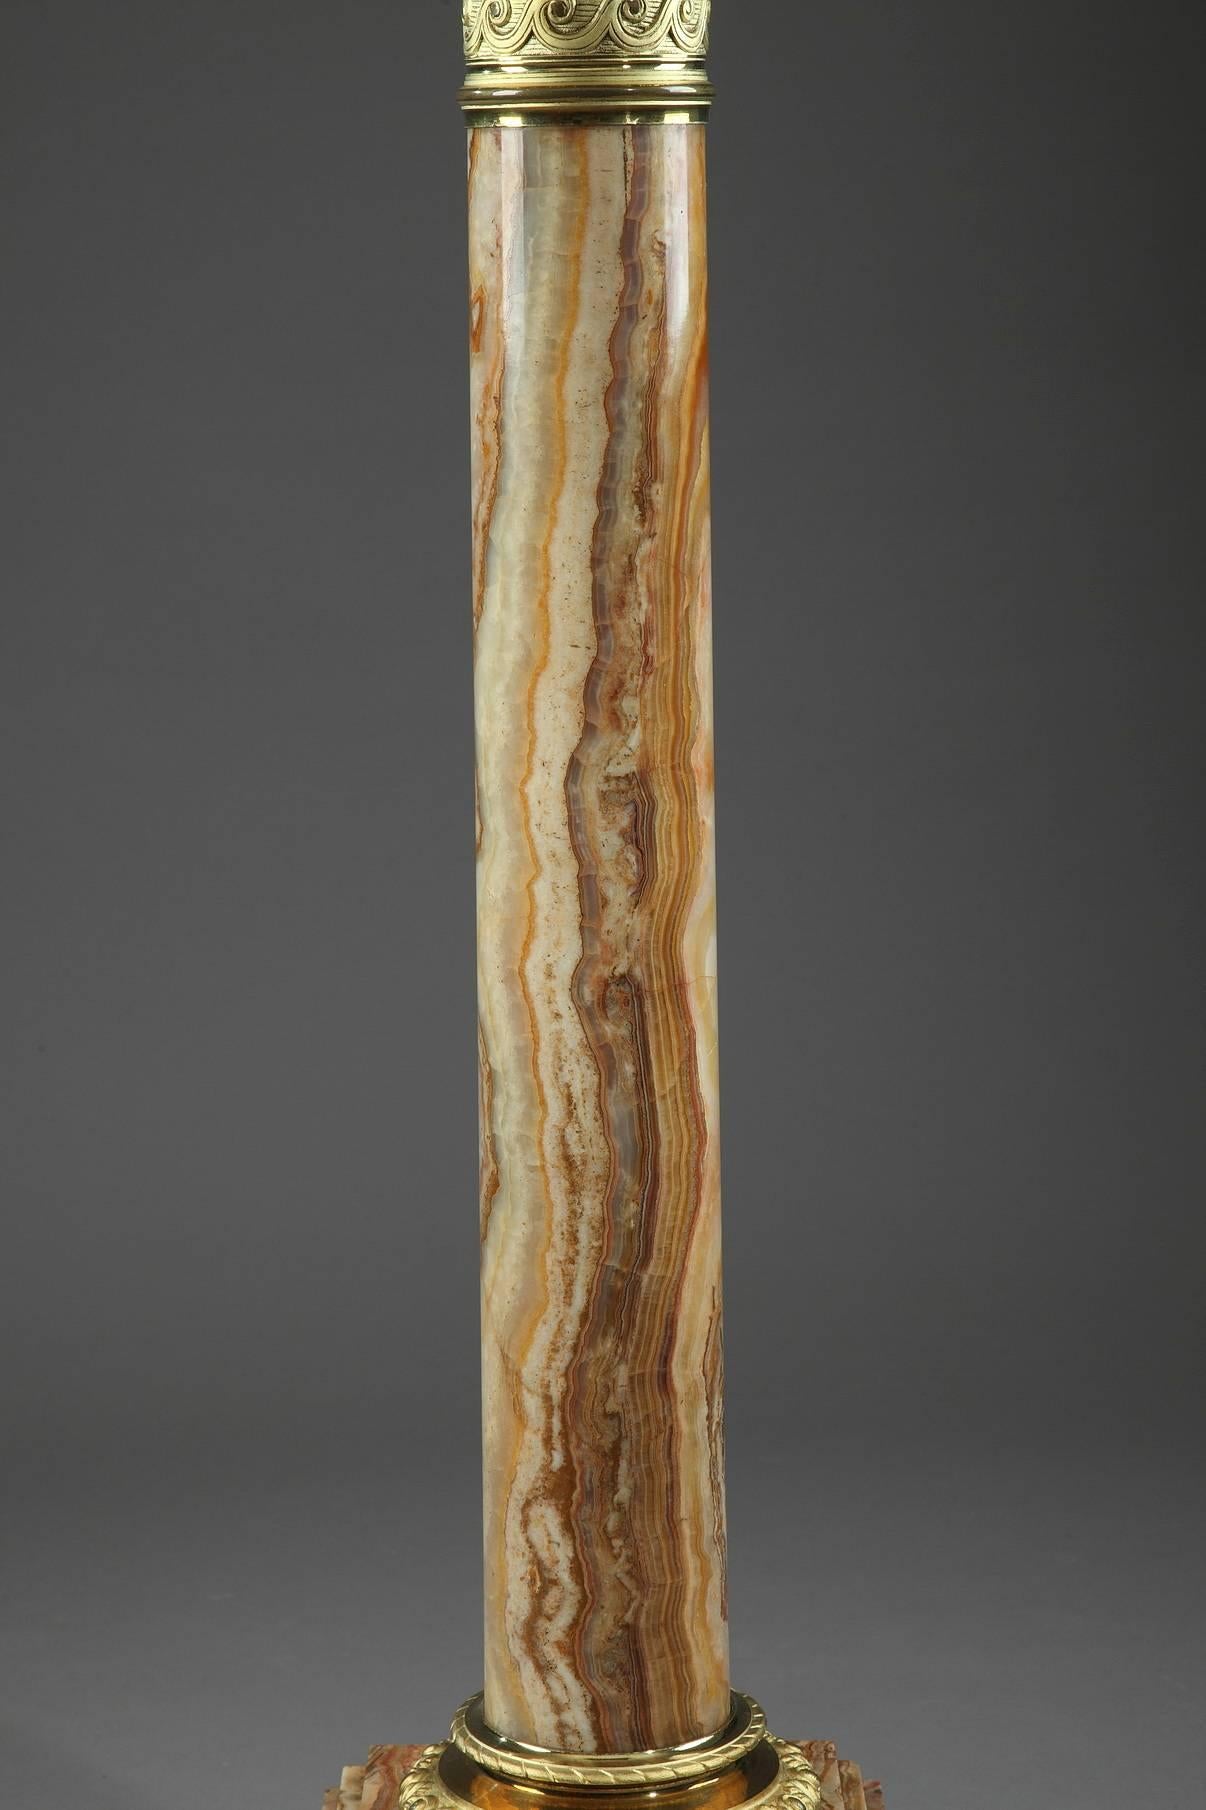 Onyx display column in a spectrum of ochre tones. The top and bottom of the shaft is encircled with a ring of gilt, sculpted bronze that is embellished with alternating palmettes and ovals on the bottom and a frieze of waves on the top. Our column